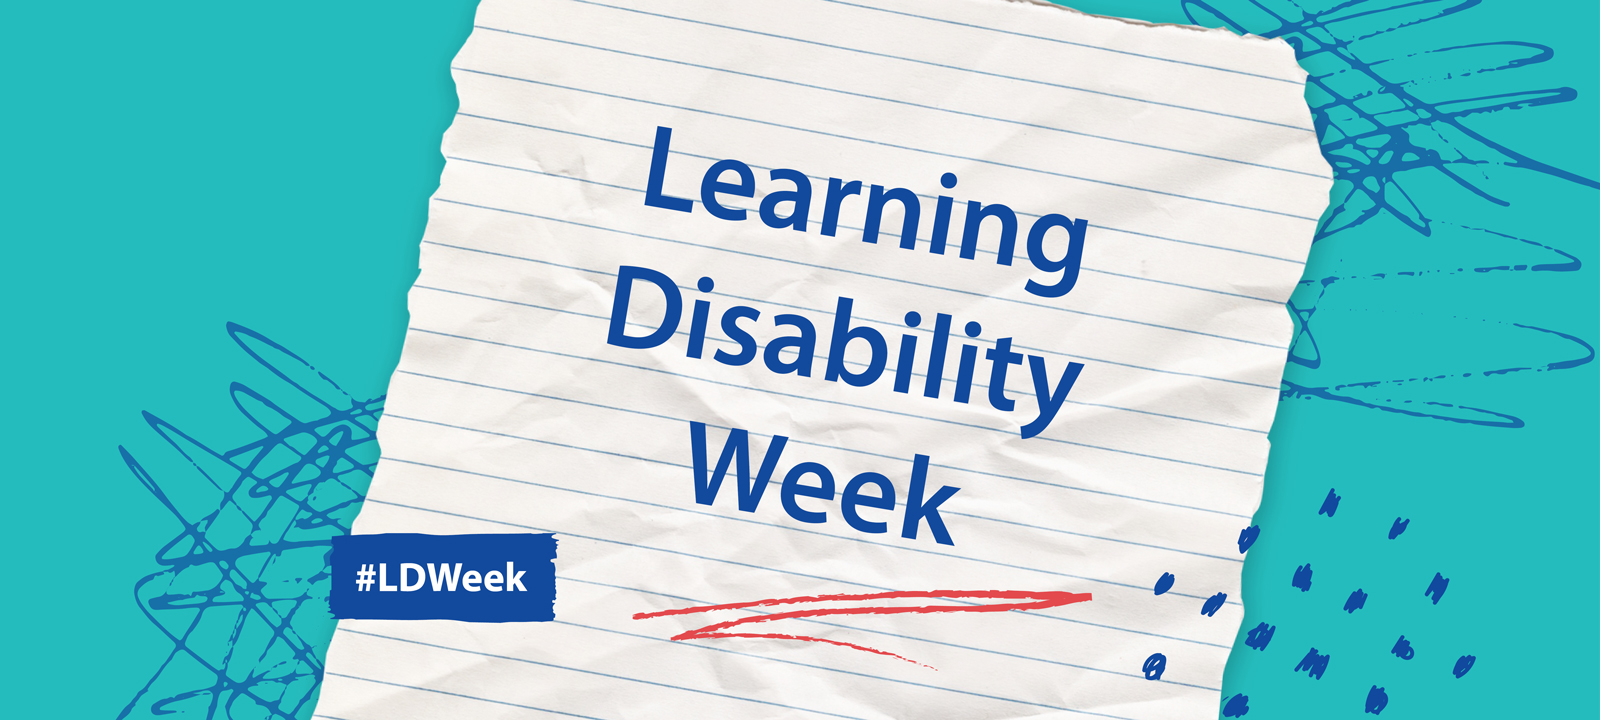 Learning Disability Week – Community and Volunteering